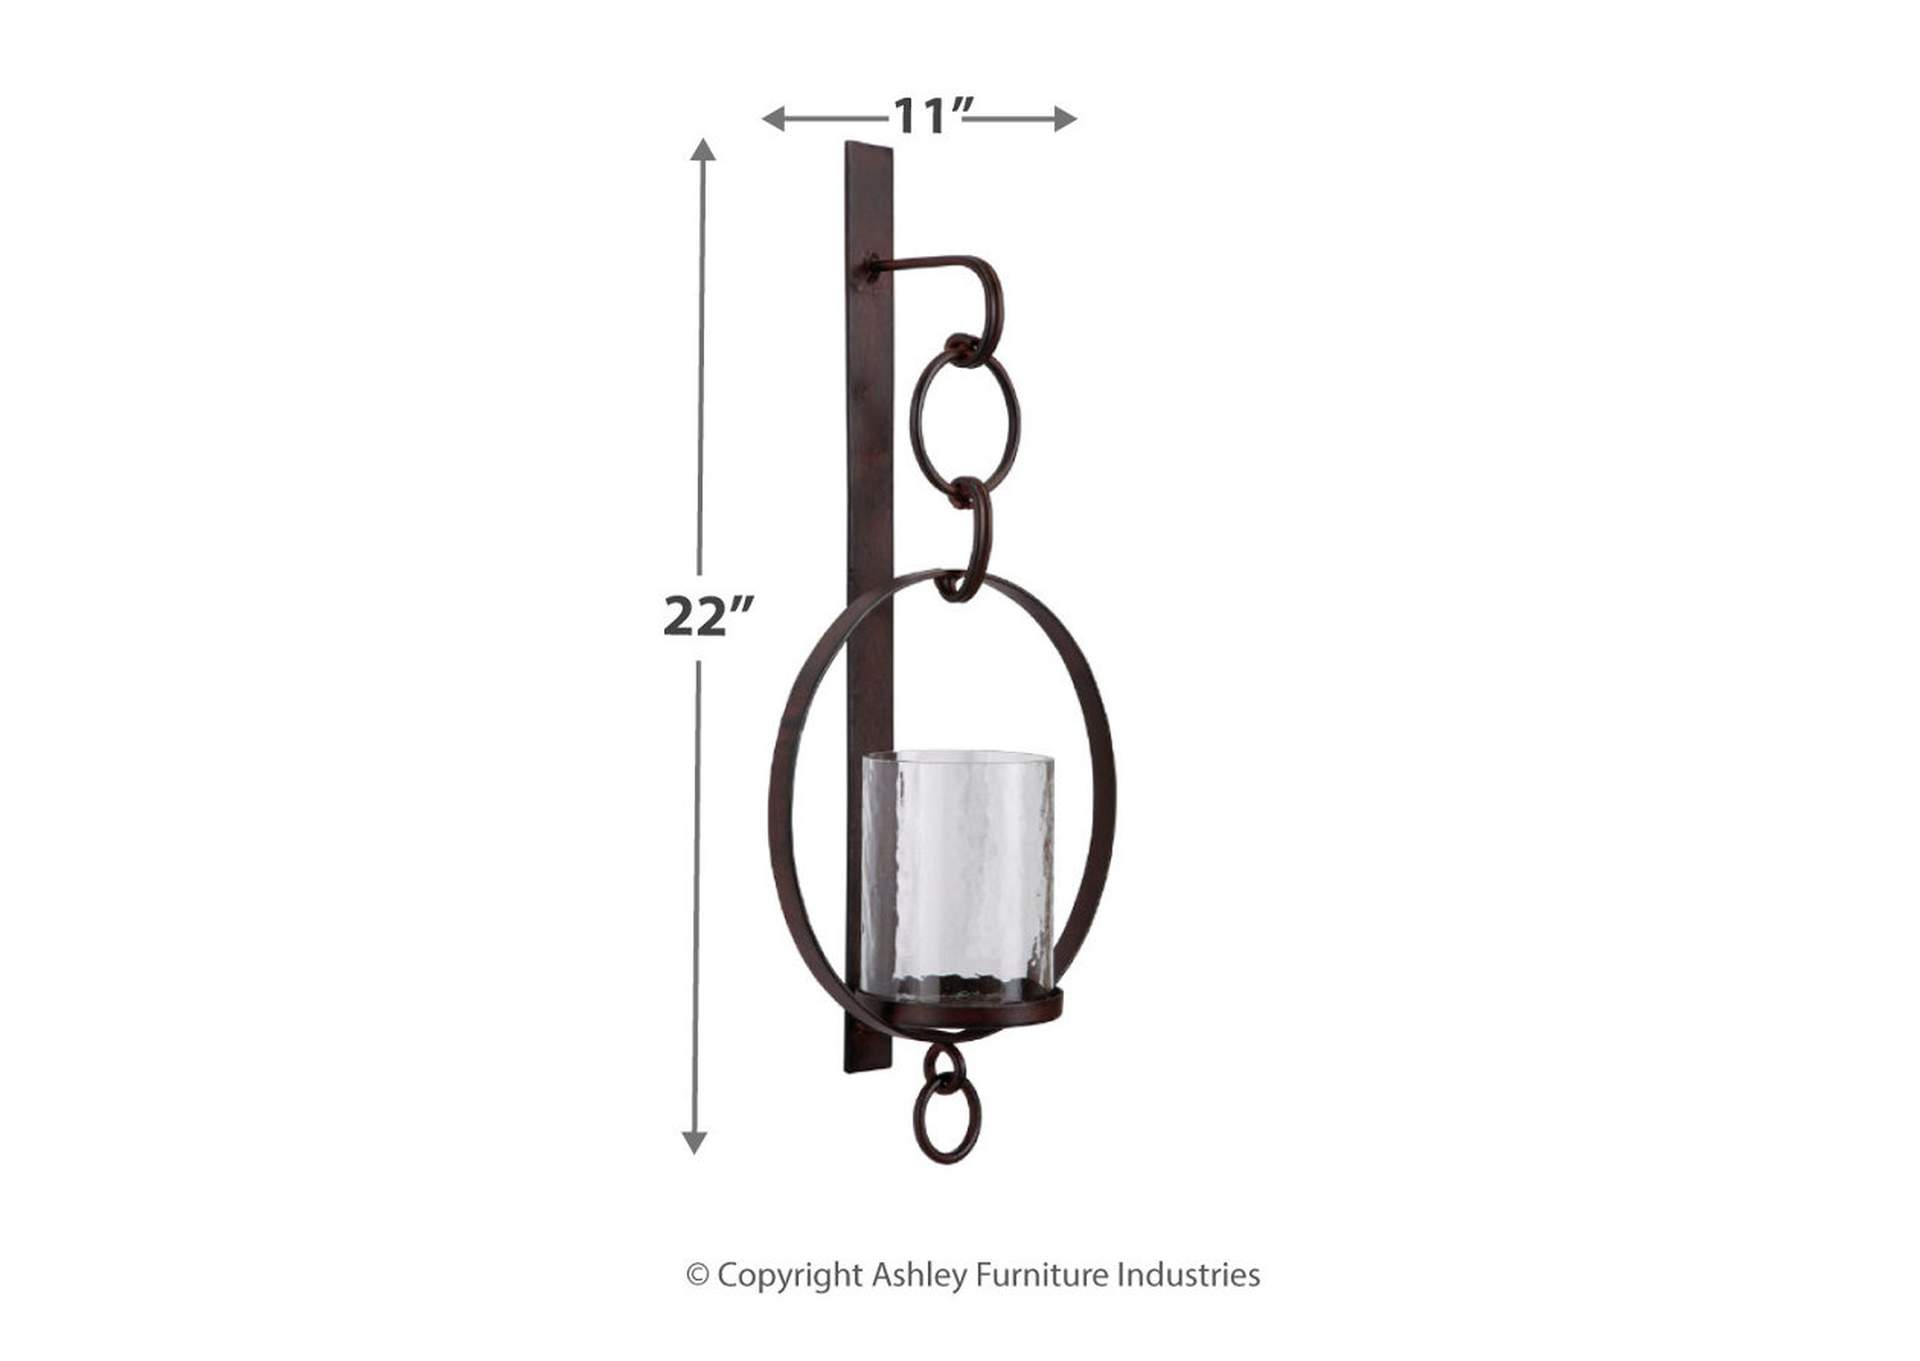 Ogaleesha Wall Sconce,Signature Design By Ashley